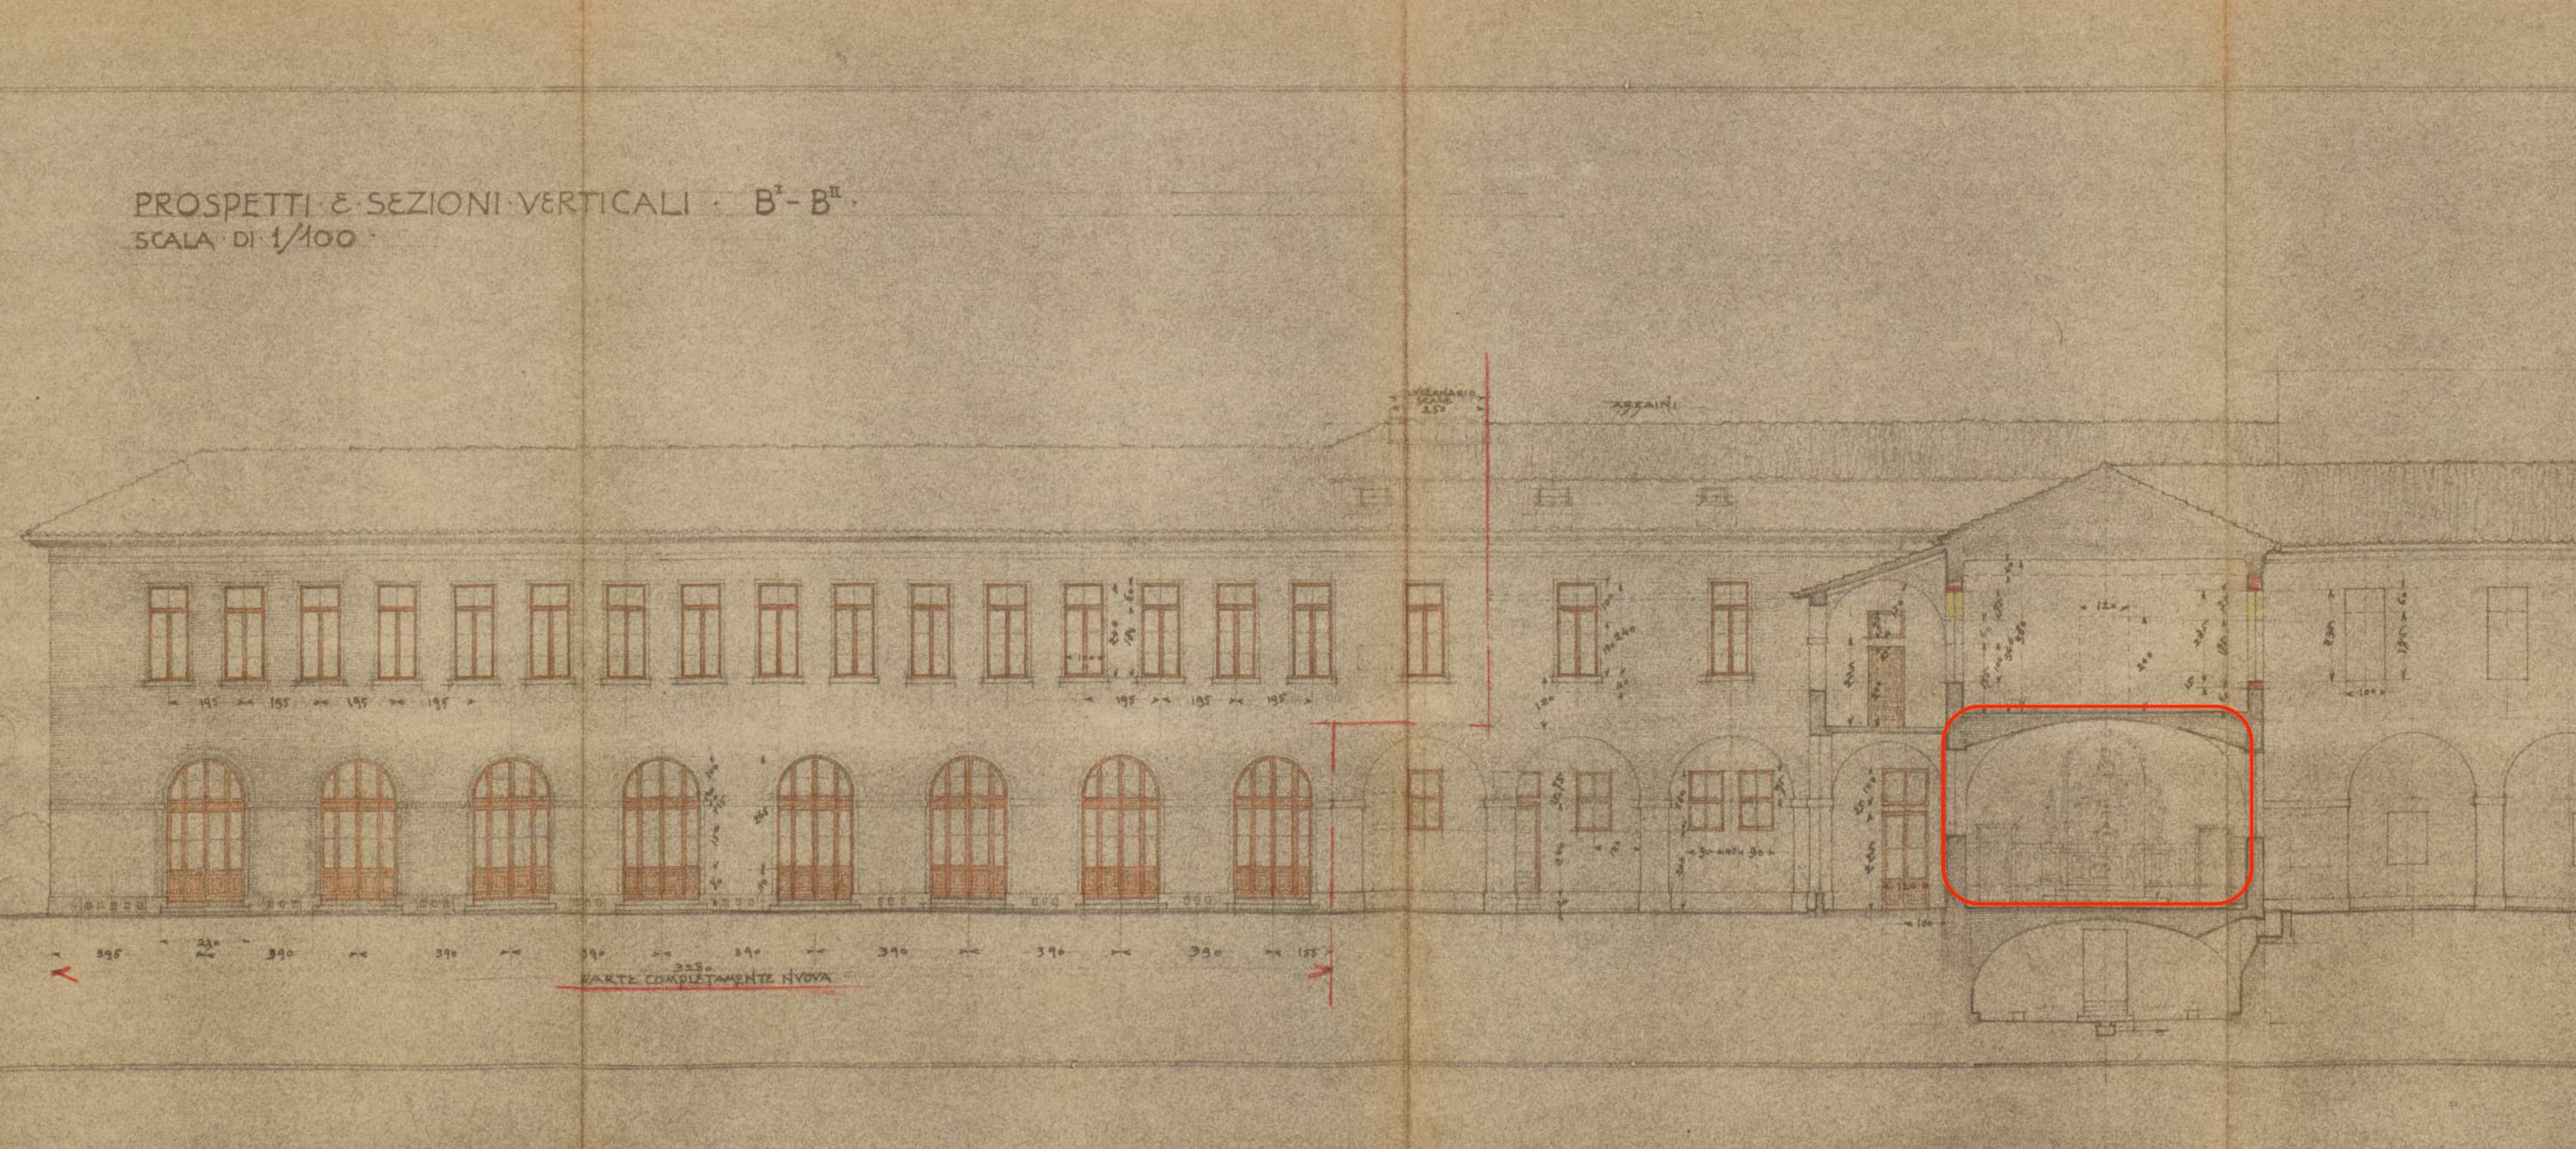 Prospects and vertical sections in the project for the arrangement of the Pio Conservatorio di Santa Caterina of 1930